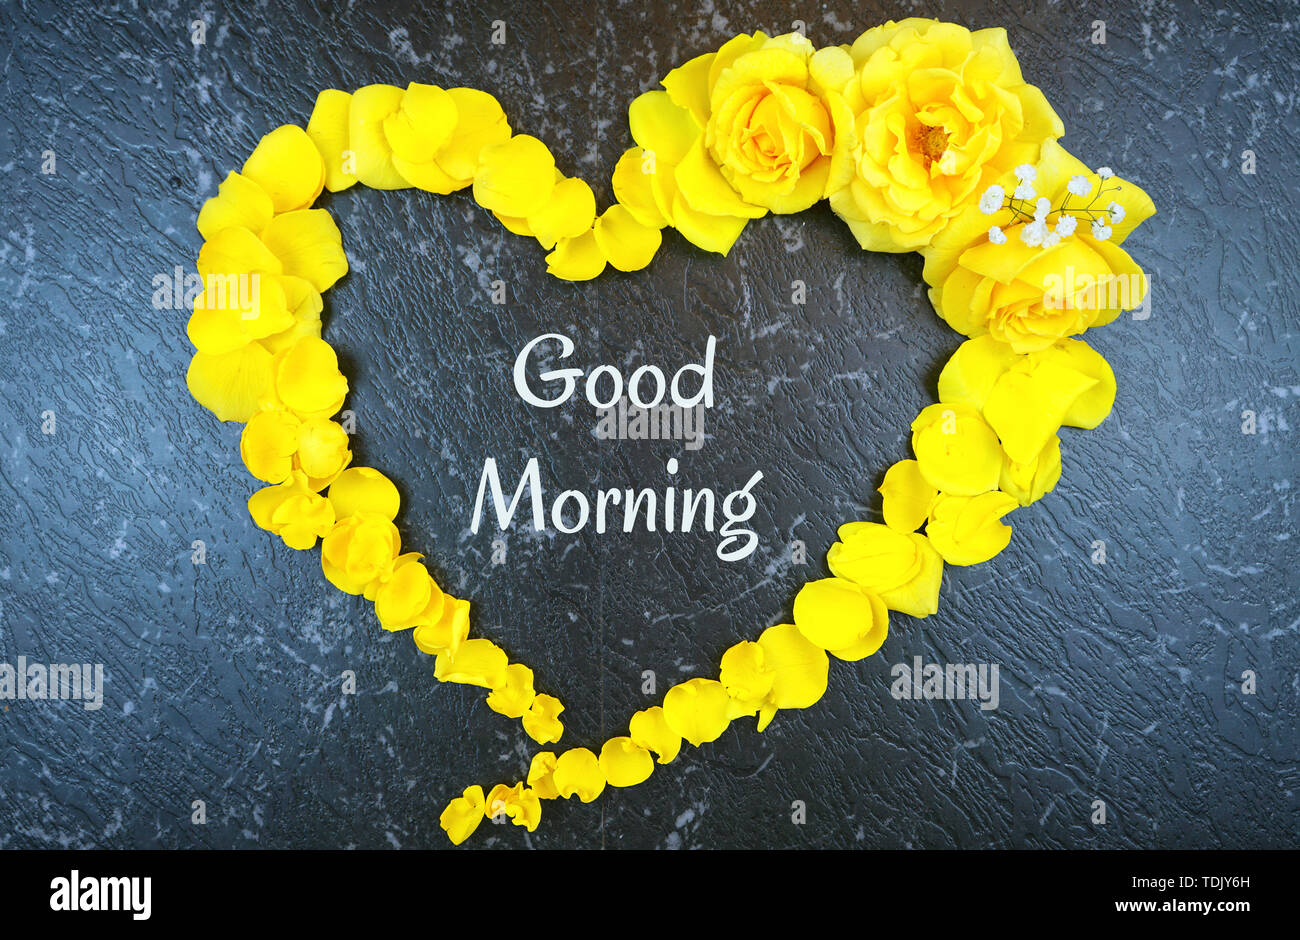 Good morning concept with text inside heart made from fresh yellow ...